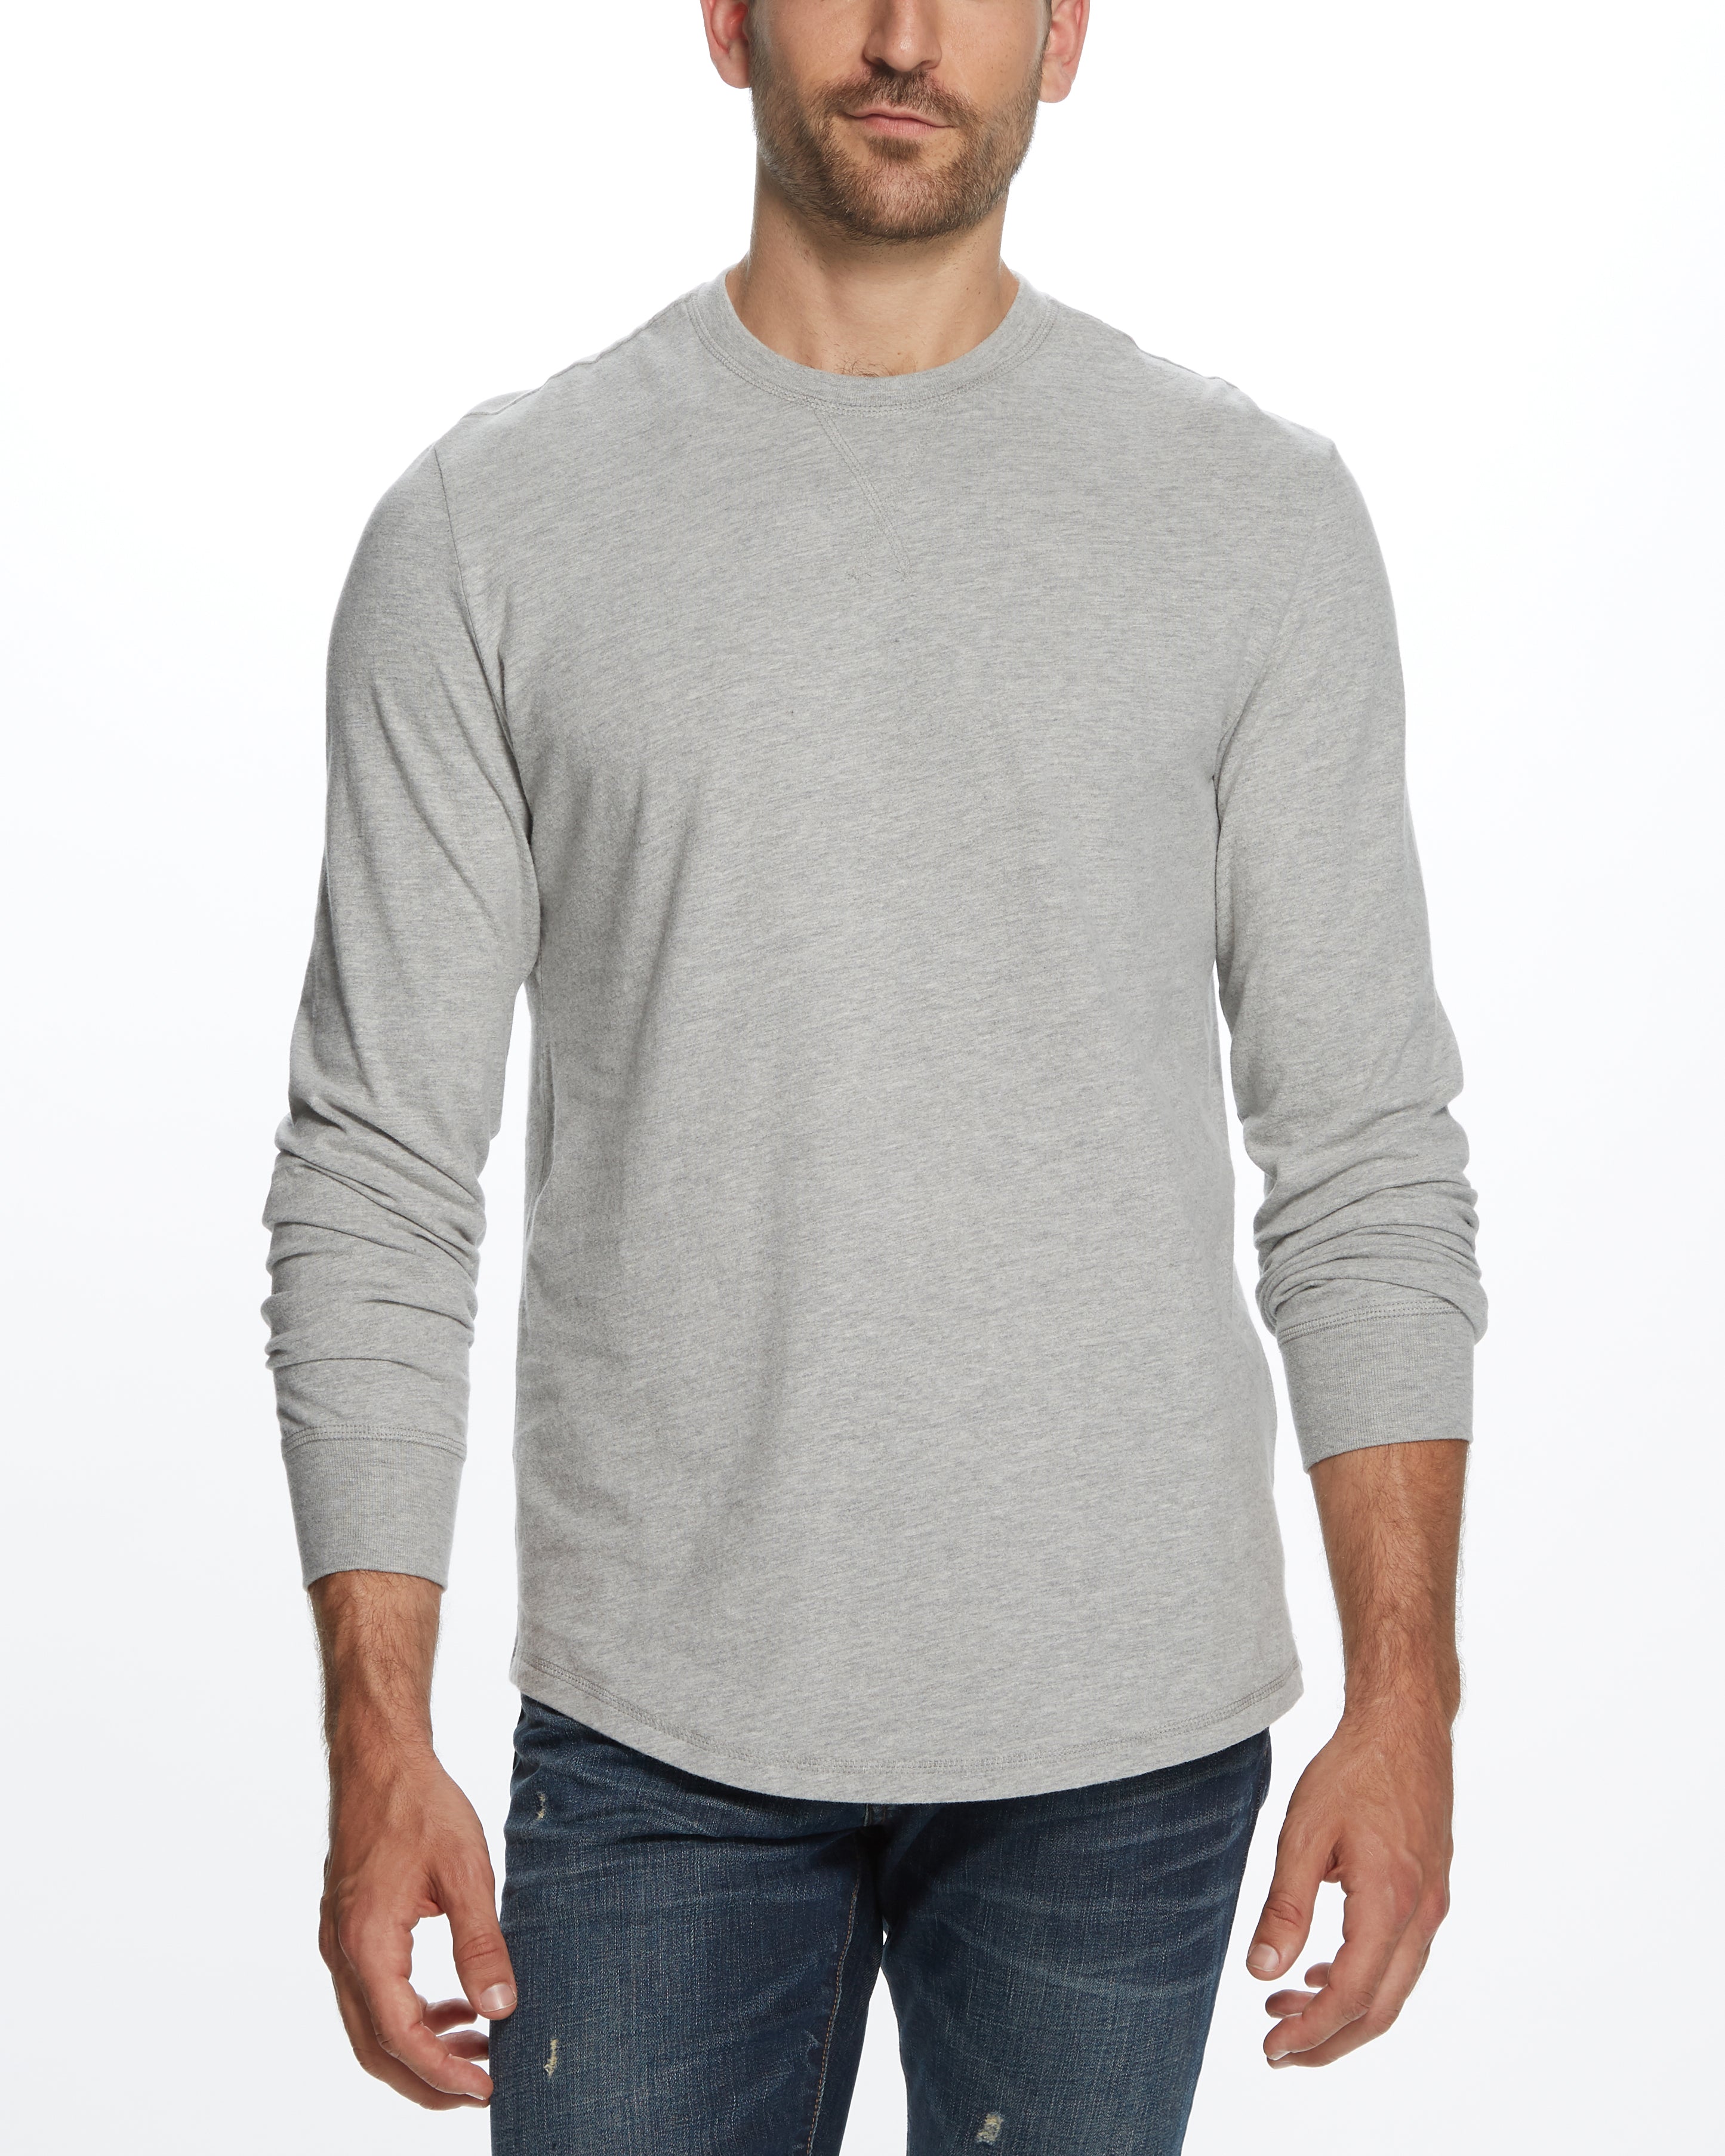 LONG SLEEVE BRUSHED CREW IN LIGHT GREY HEATHER